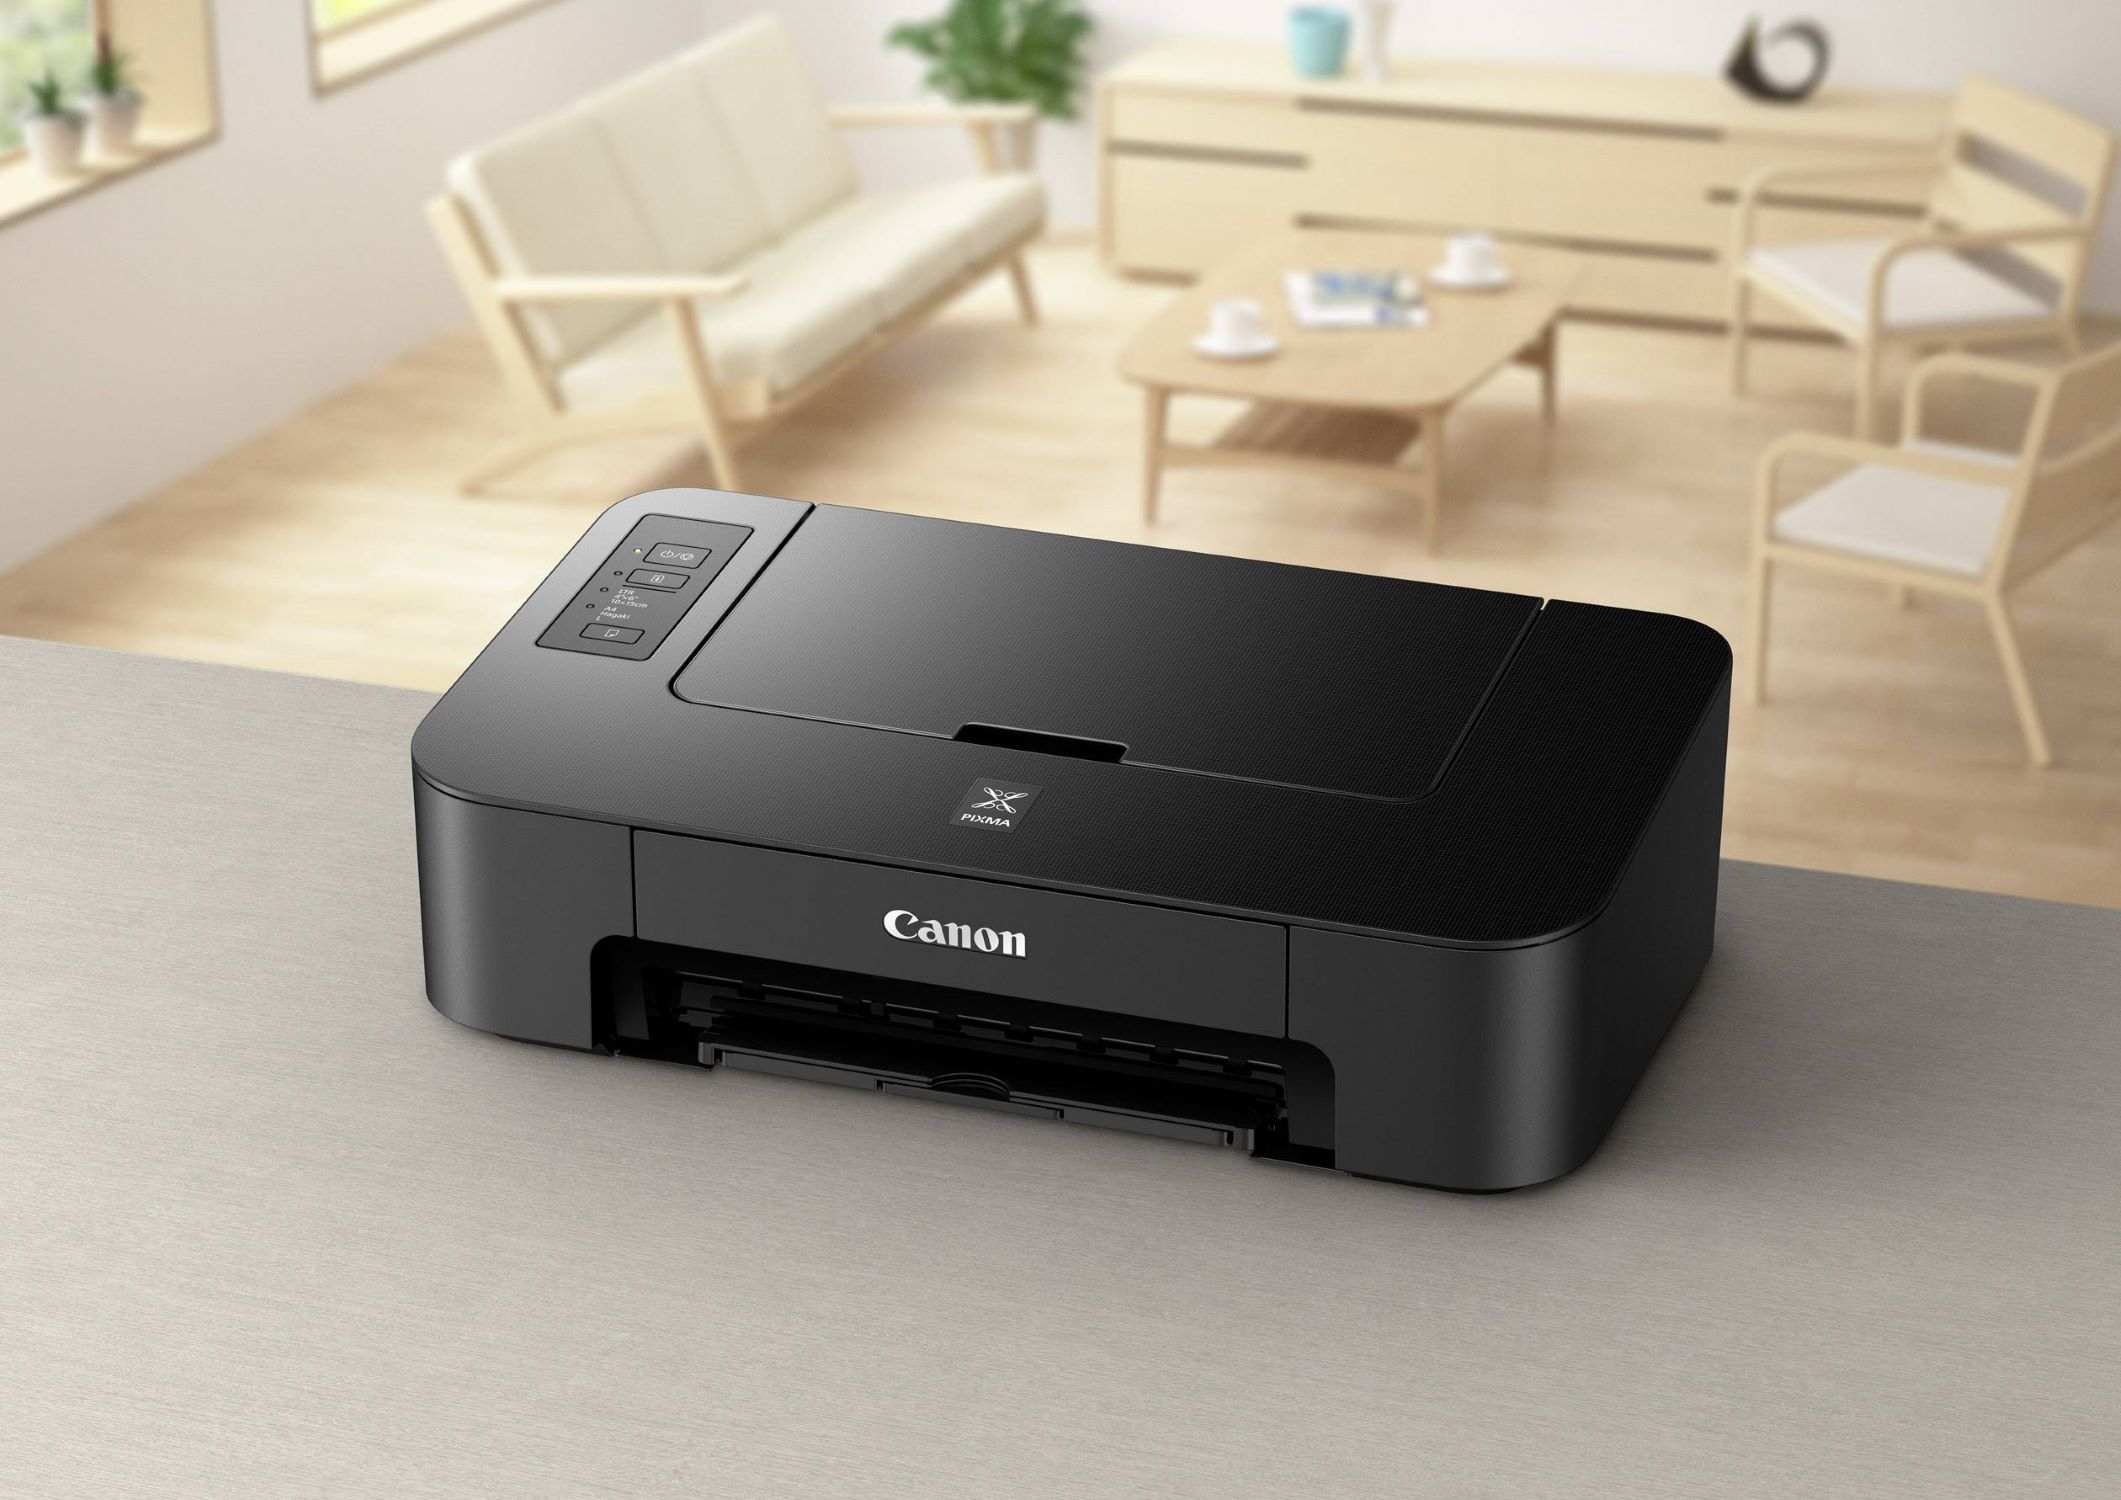 Canon Bluetooth Printer: How To Connect To Phone